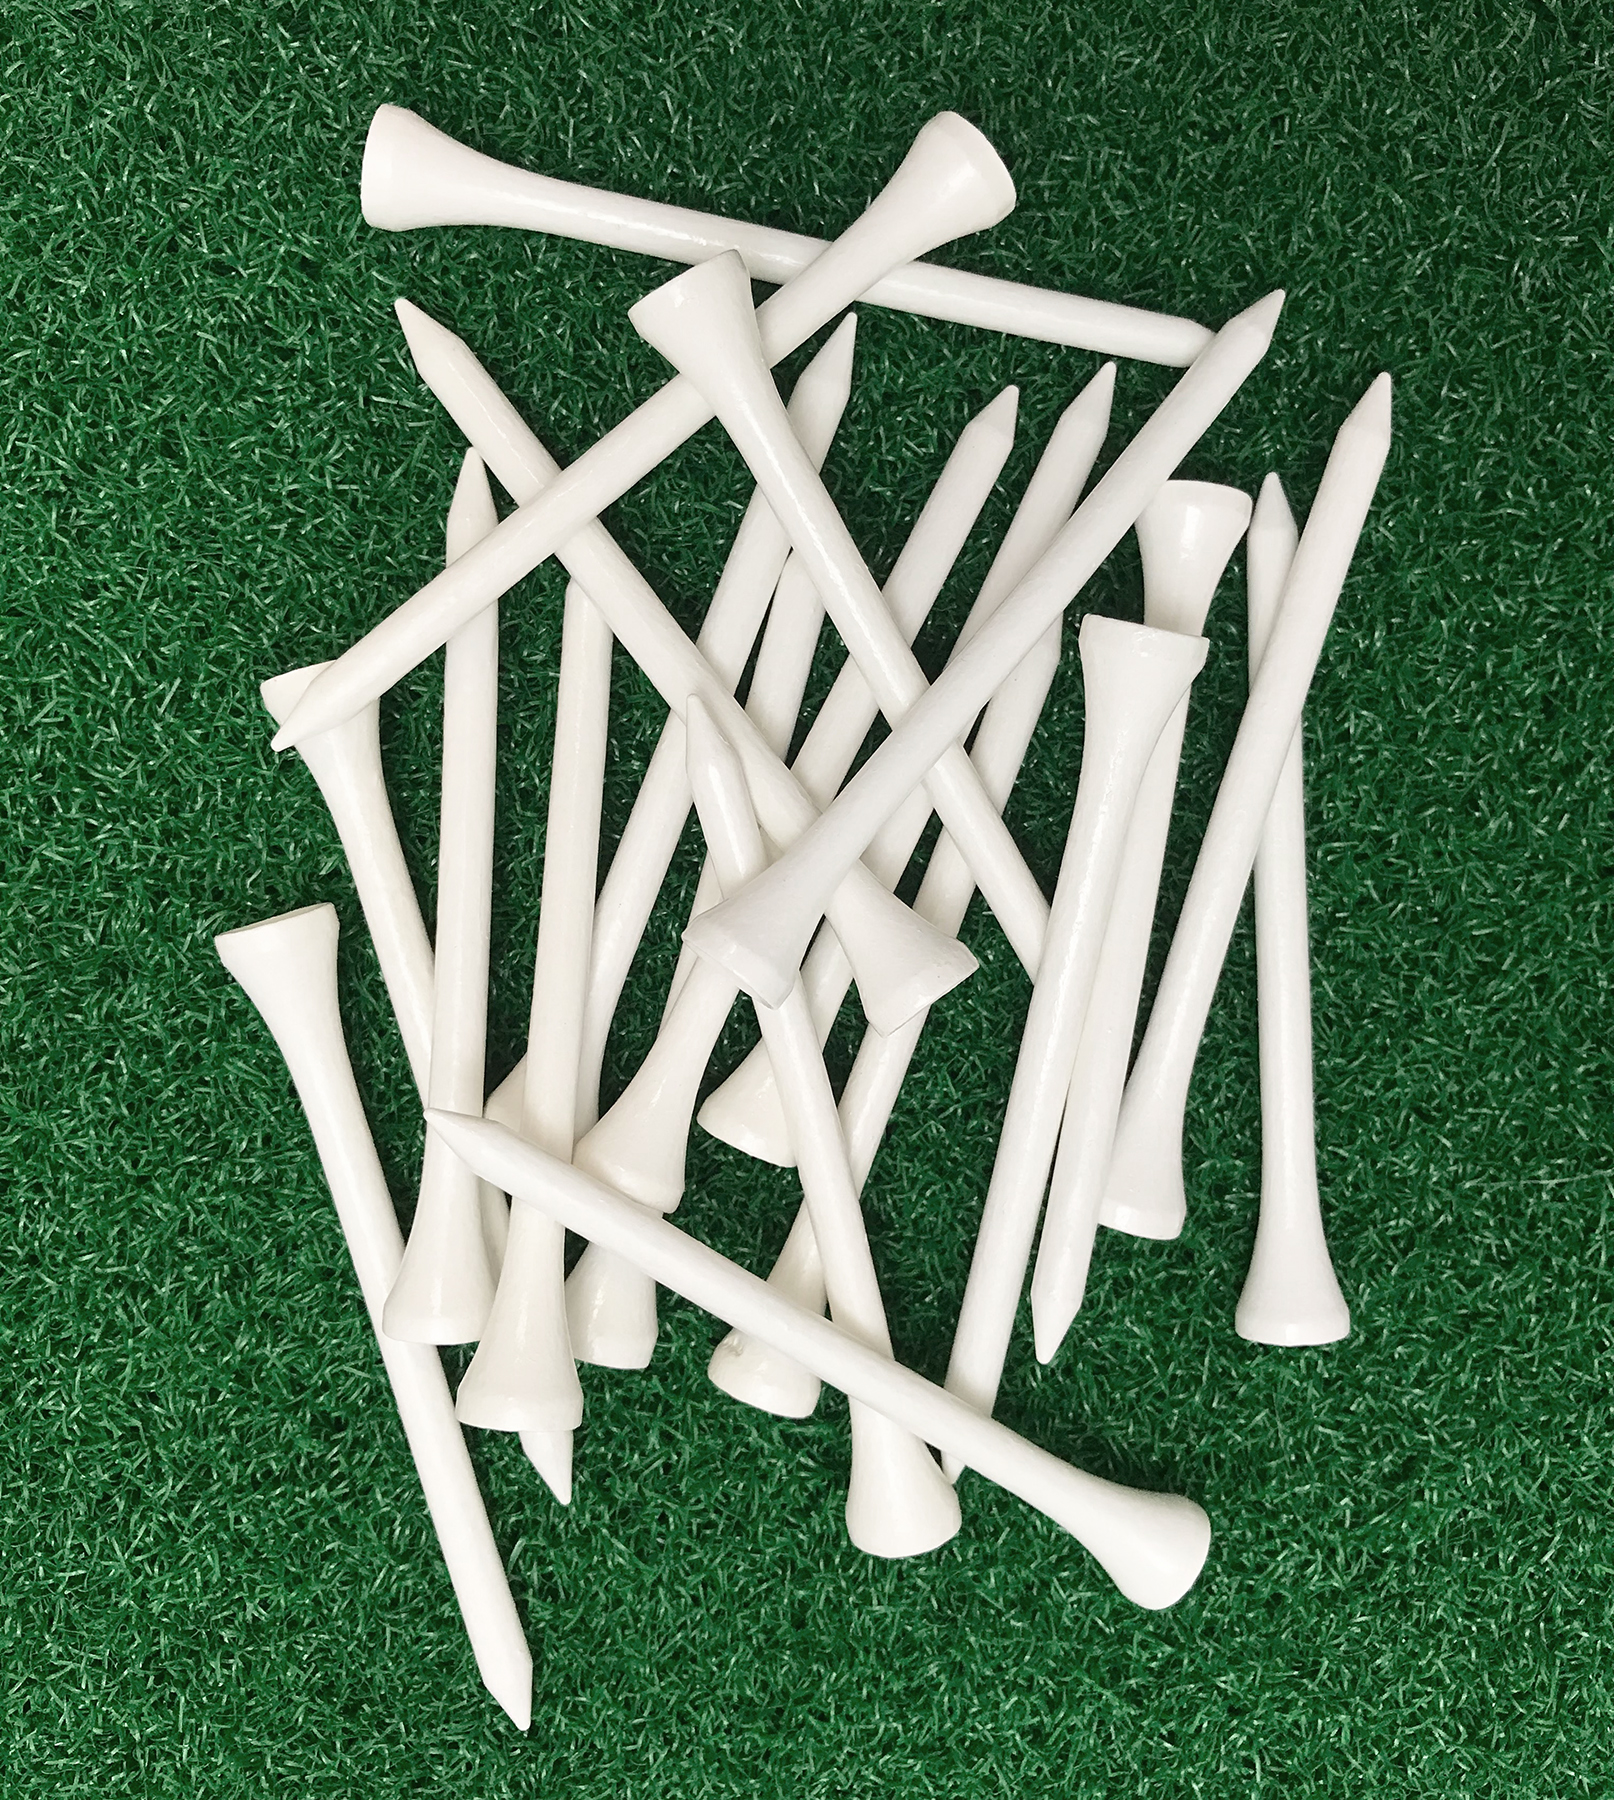 Pride Wood Golf Tee, 3-1/4 inch, White, 90 Count - image 3 of 6